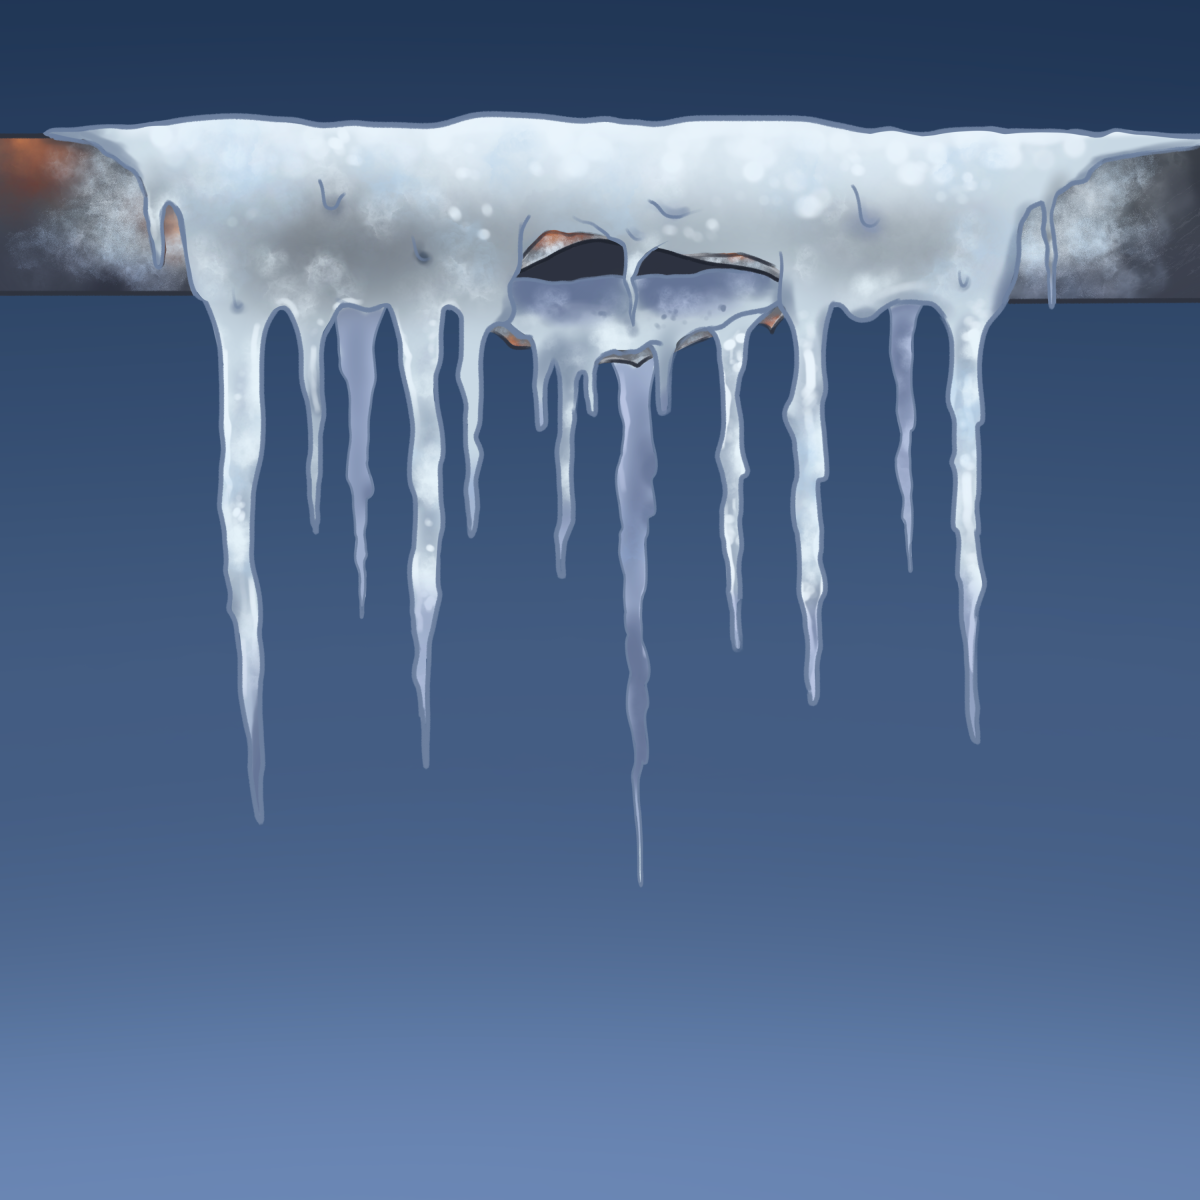 Louisiana pipes are not built to last for long periods of freezing temperatures.